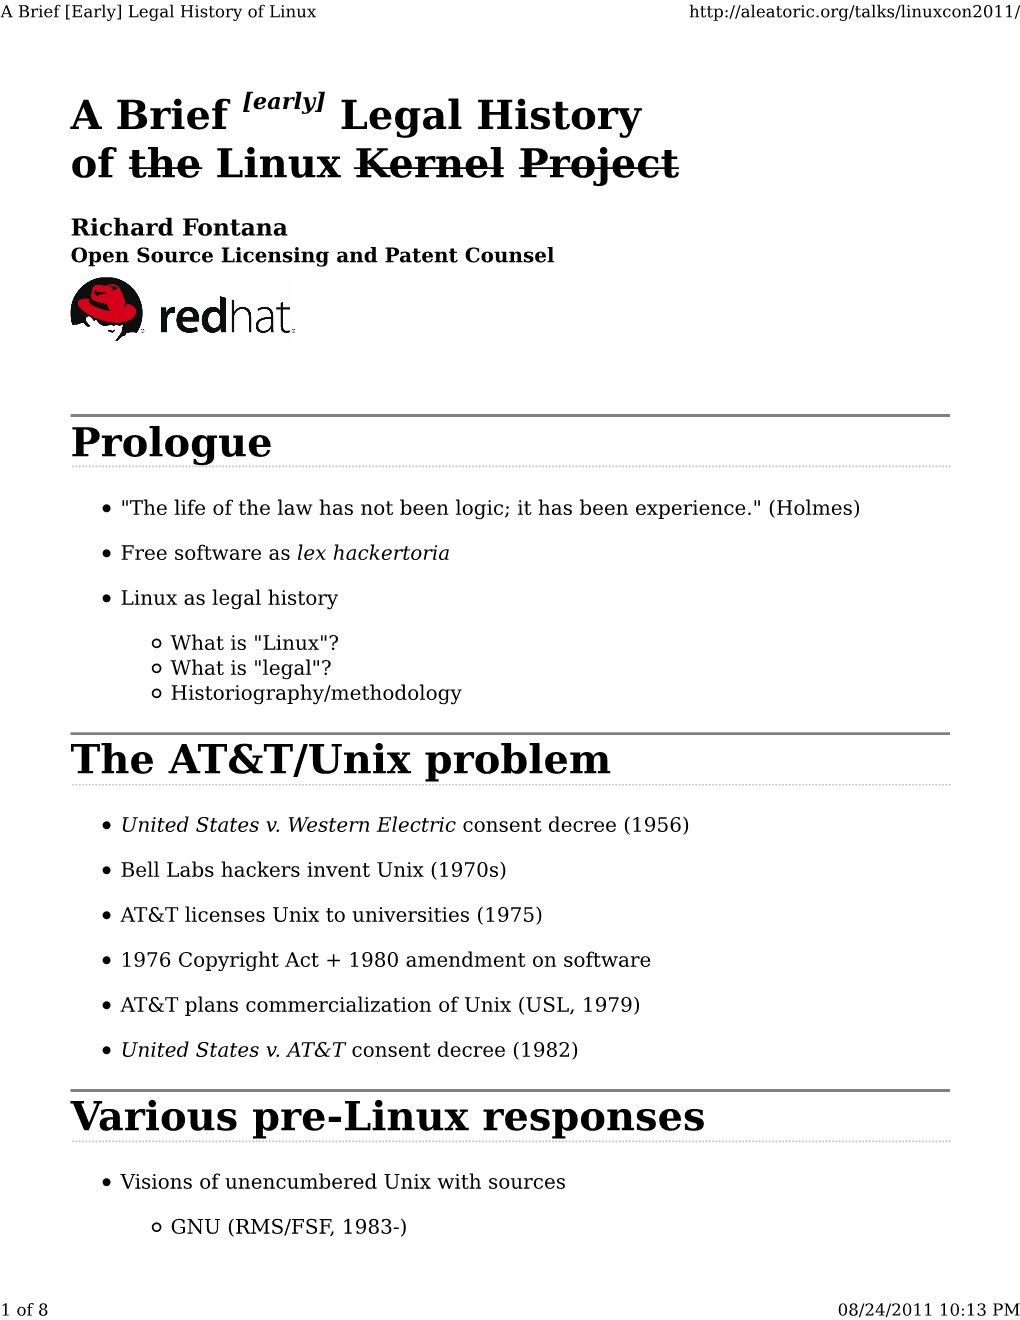 [Early] Legal History of the Linux Kernel Project Prologue the AT&T